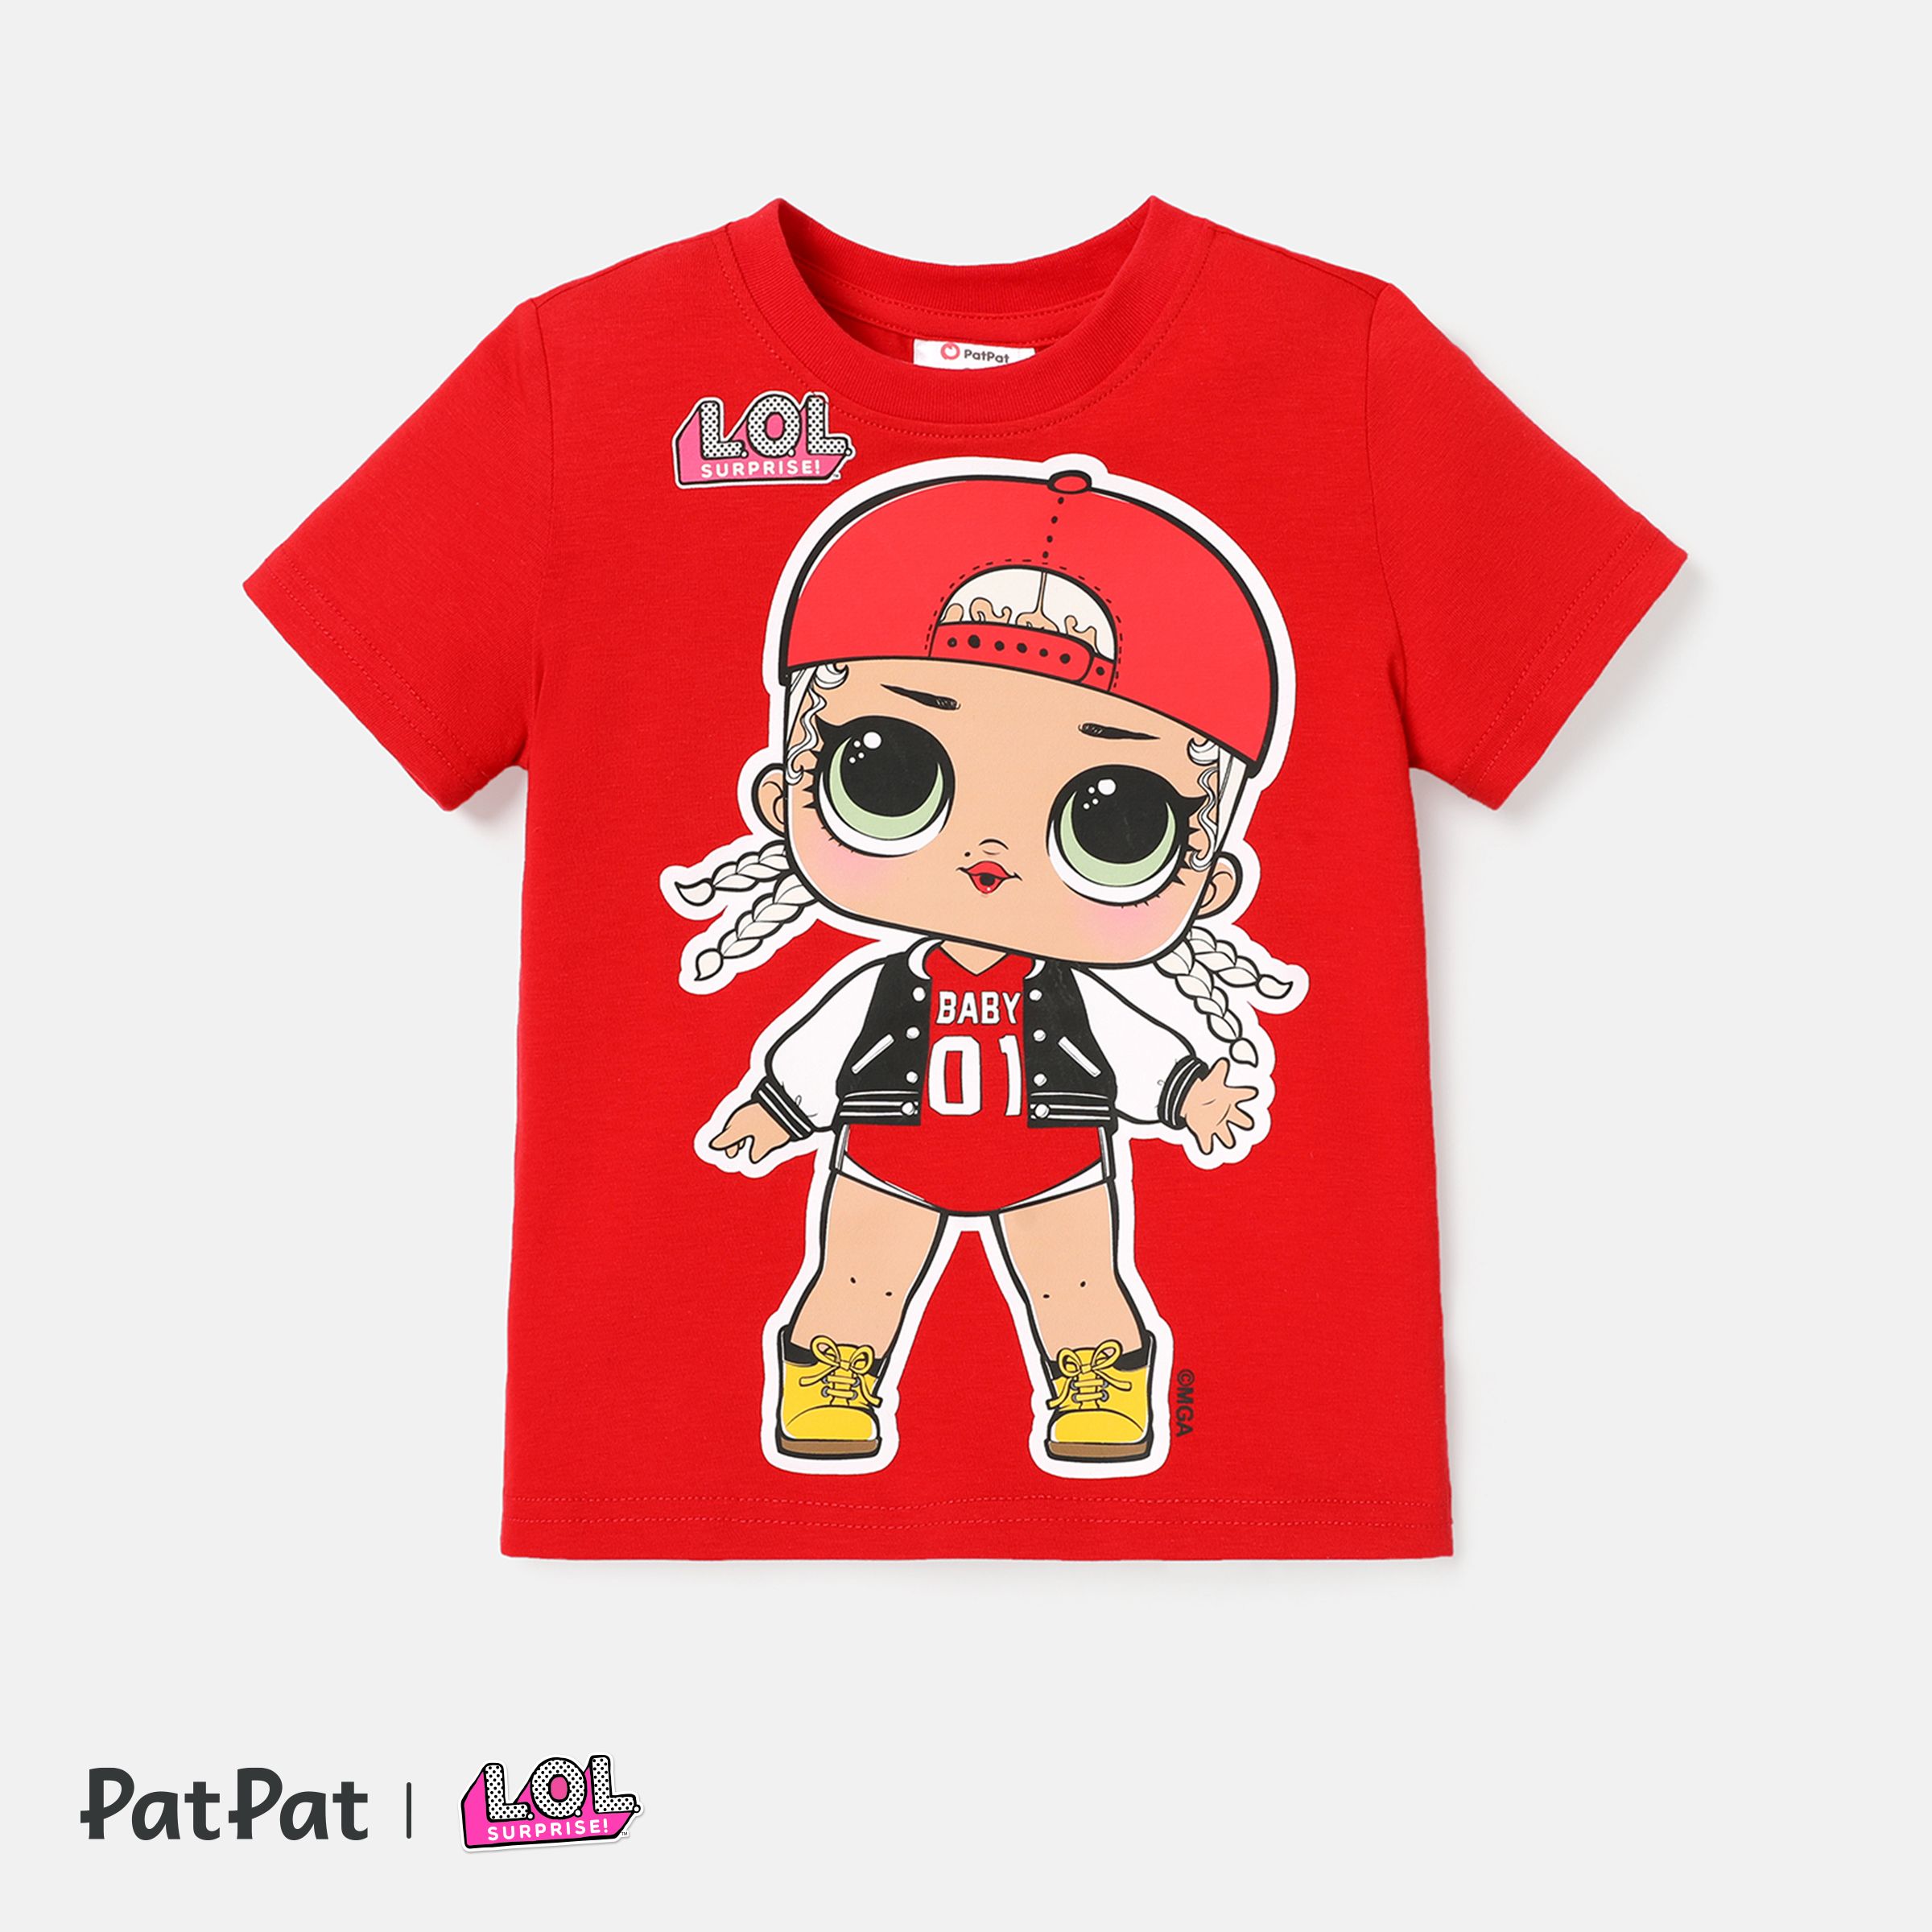 L.O.L. SURPRISE! Toddler/Kid Girl Character Print Short-sleeve Cotton Tee